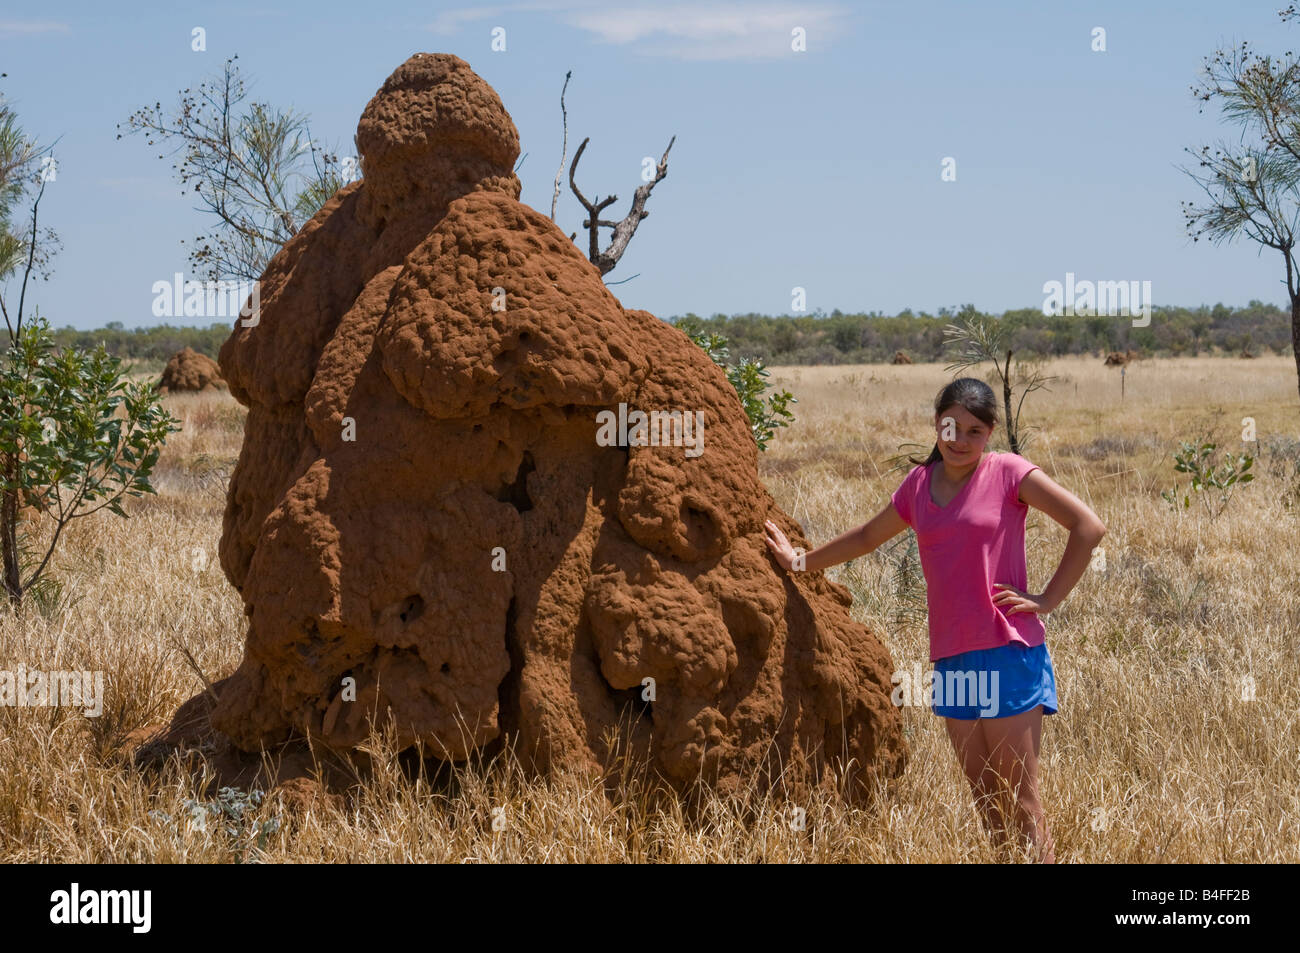 Girl standing next to a large termites nest to show scale near Fitzroy Crossing in the Kimberley region of Western Australia Stock Photo